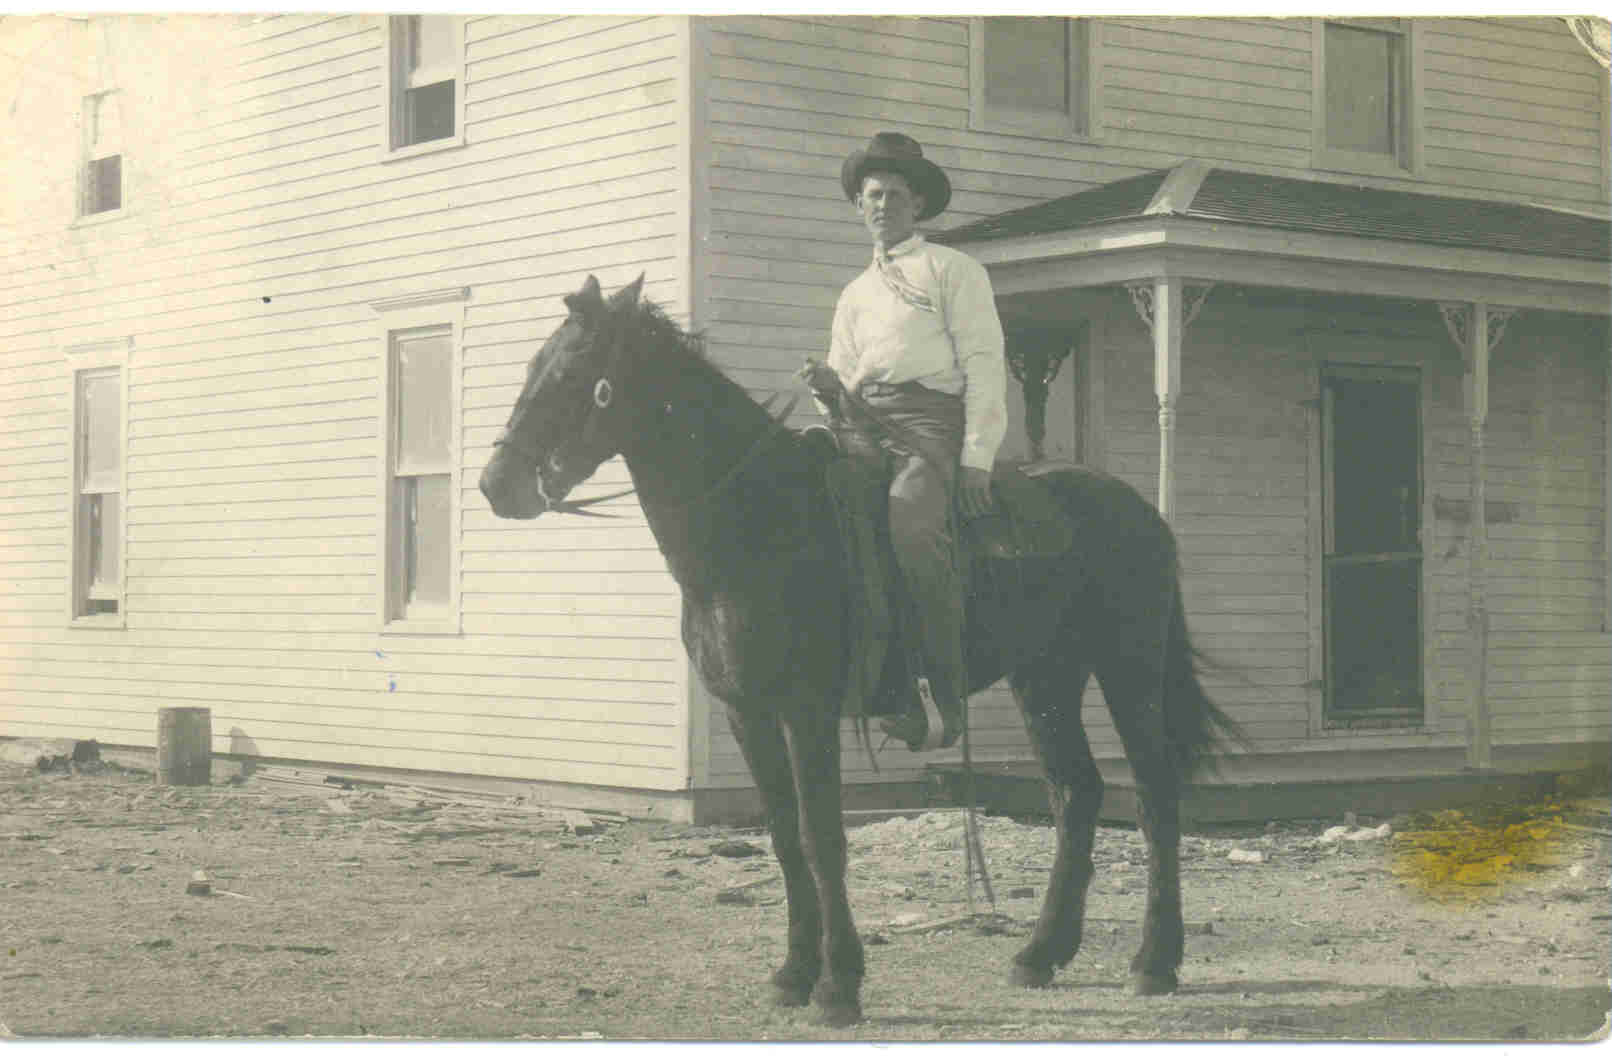 Emery Lee, age 21 with horse